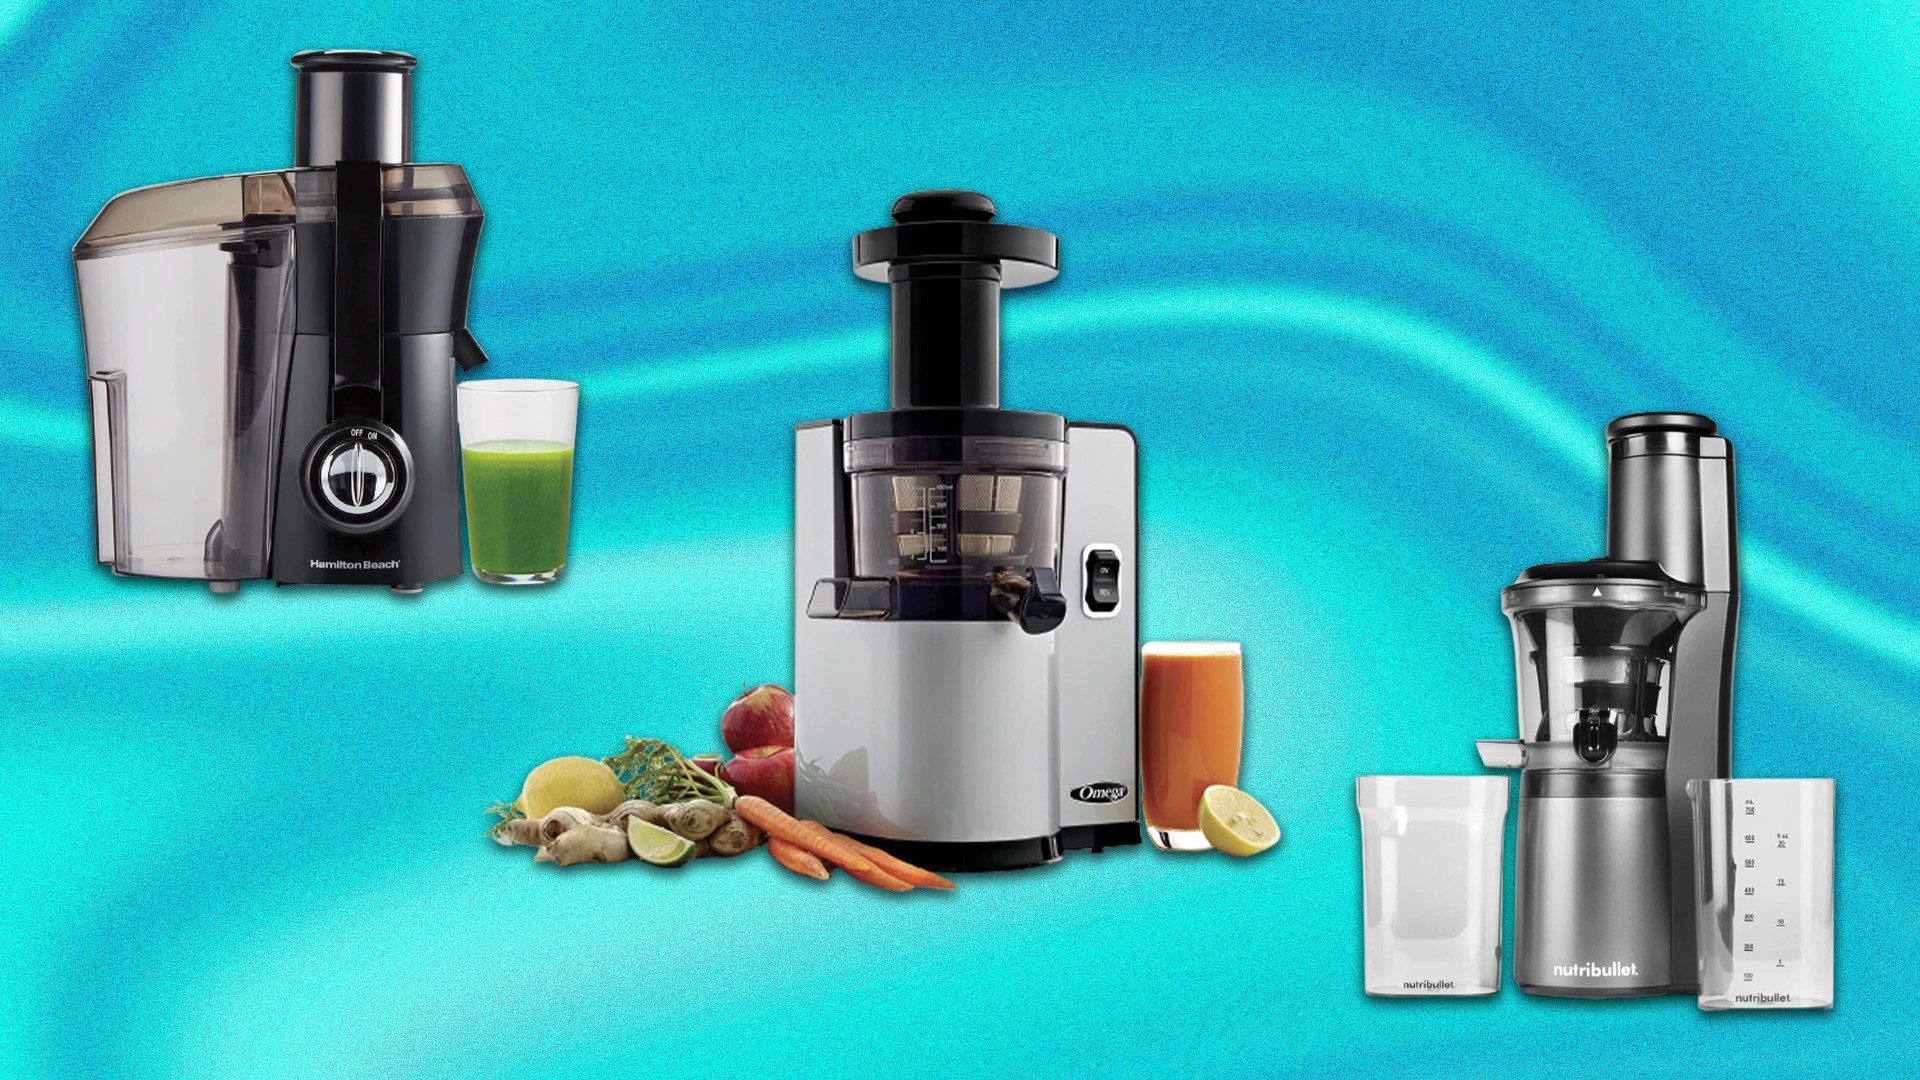 Nutribullet 600 Series Demo and How to make a Nutribullet Green